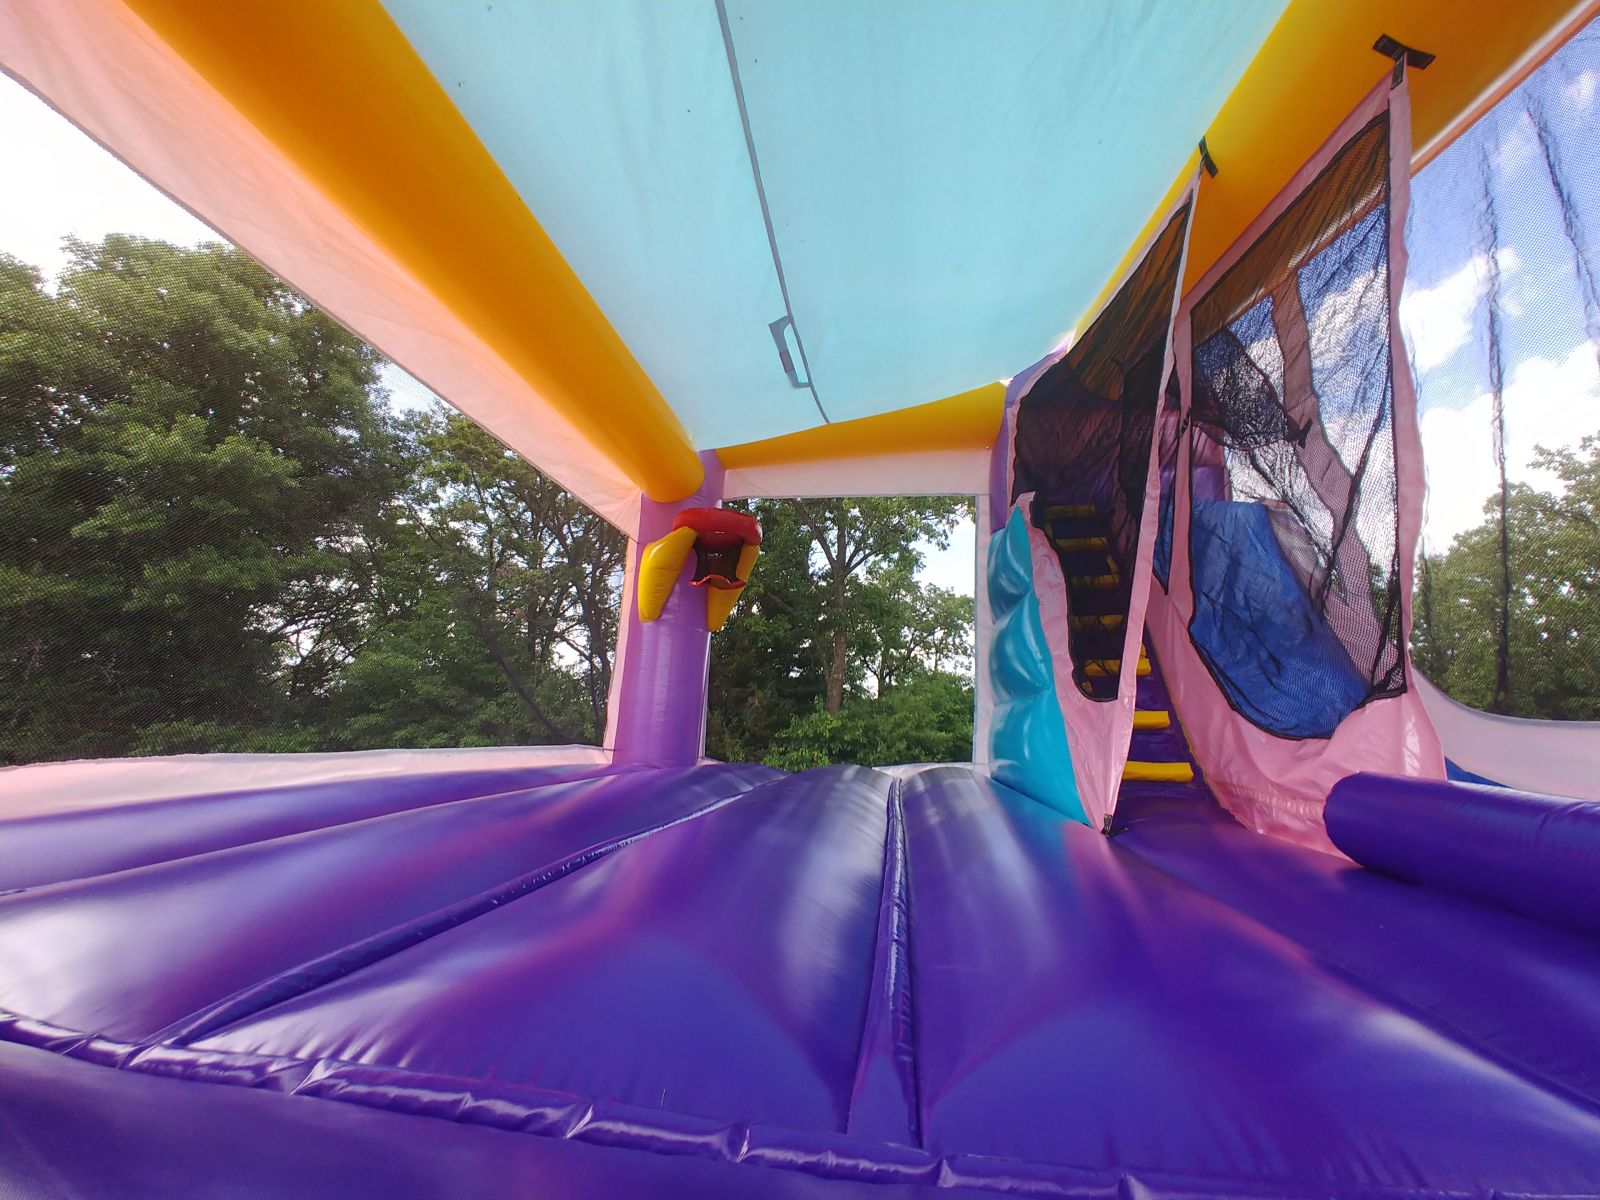 Entrance view of inflatable combo jumping area with basketball hoop and slide